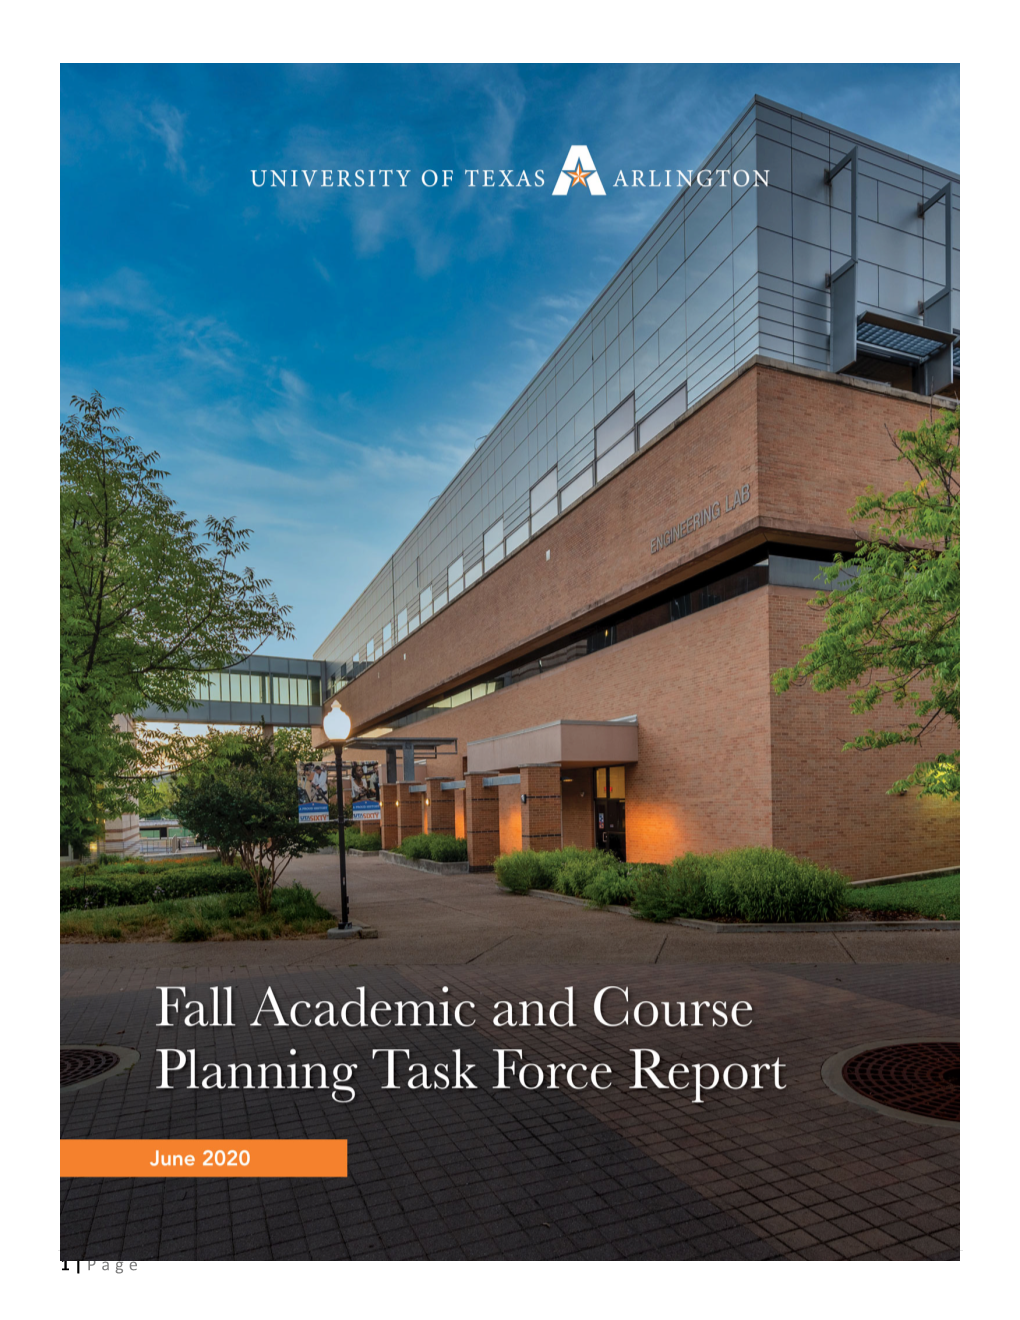 Fall Academic and Course Planning Task Force Final Report-6-21-2020